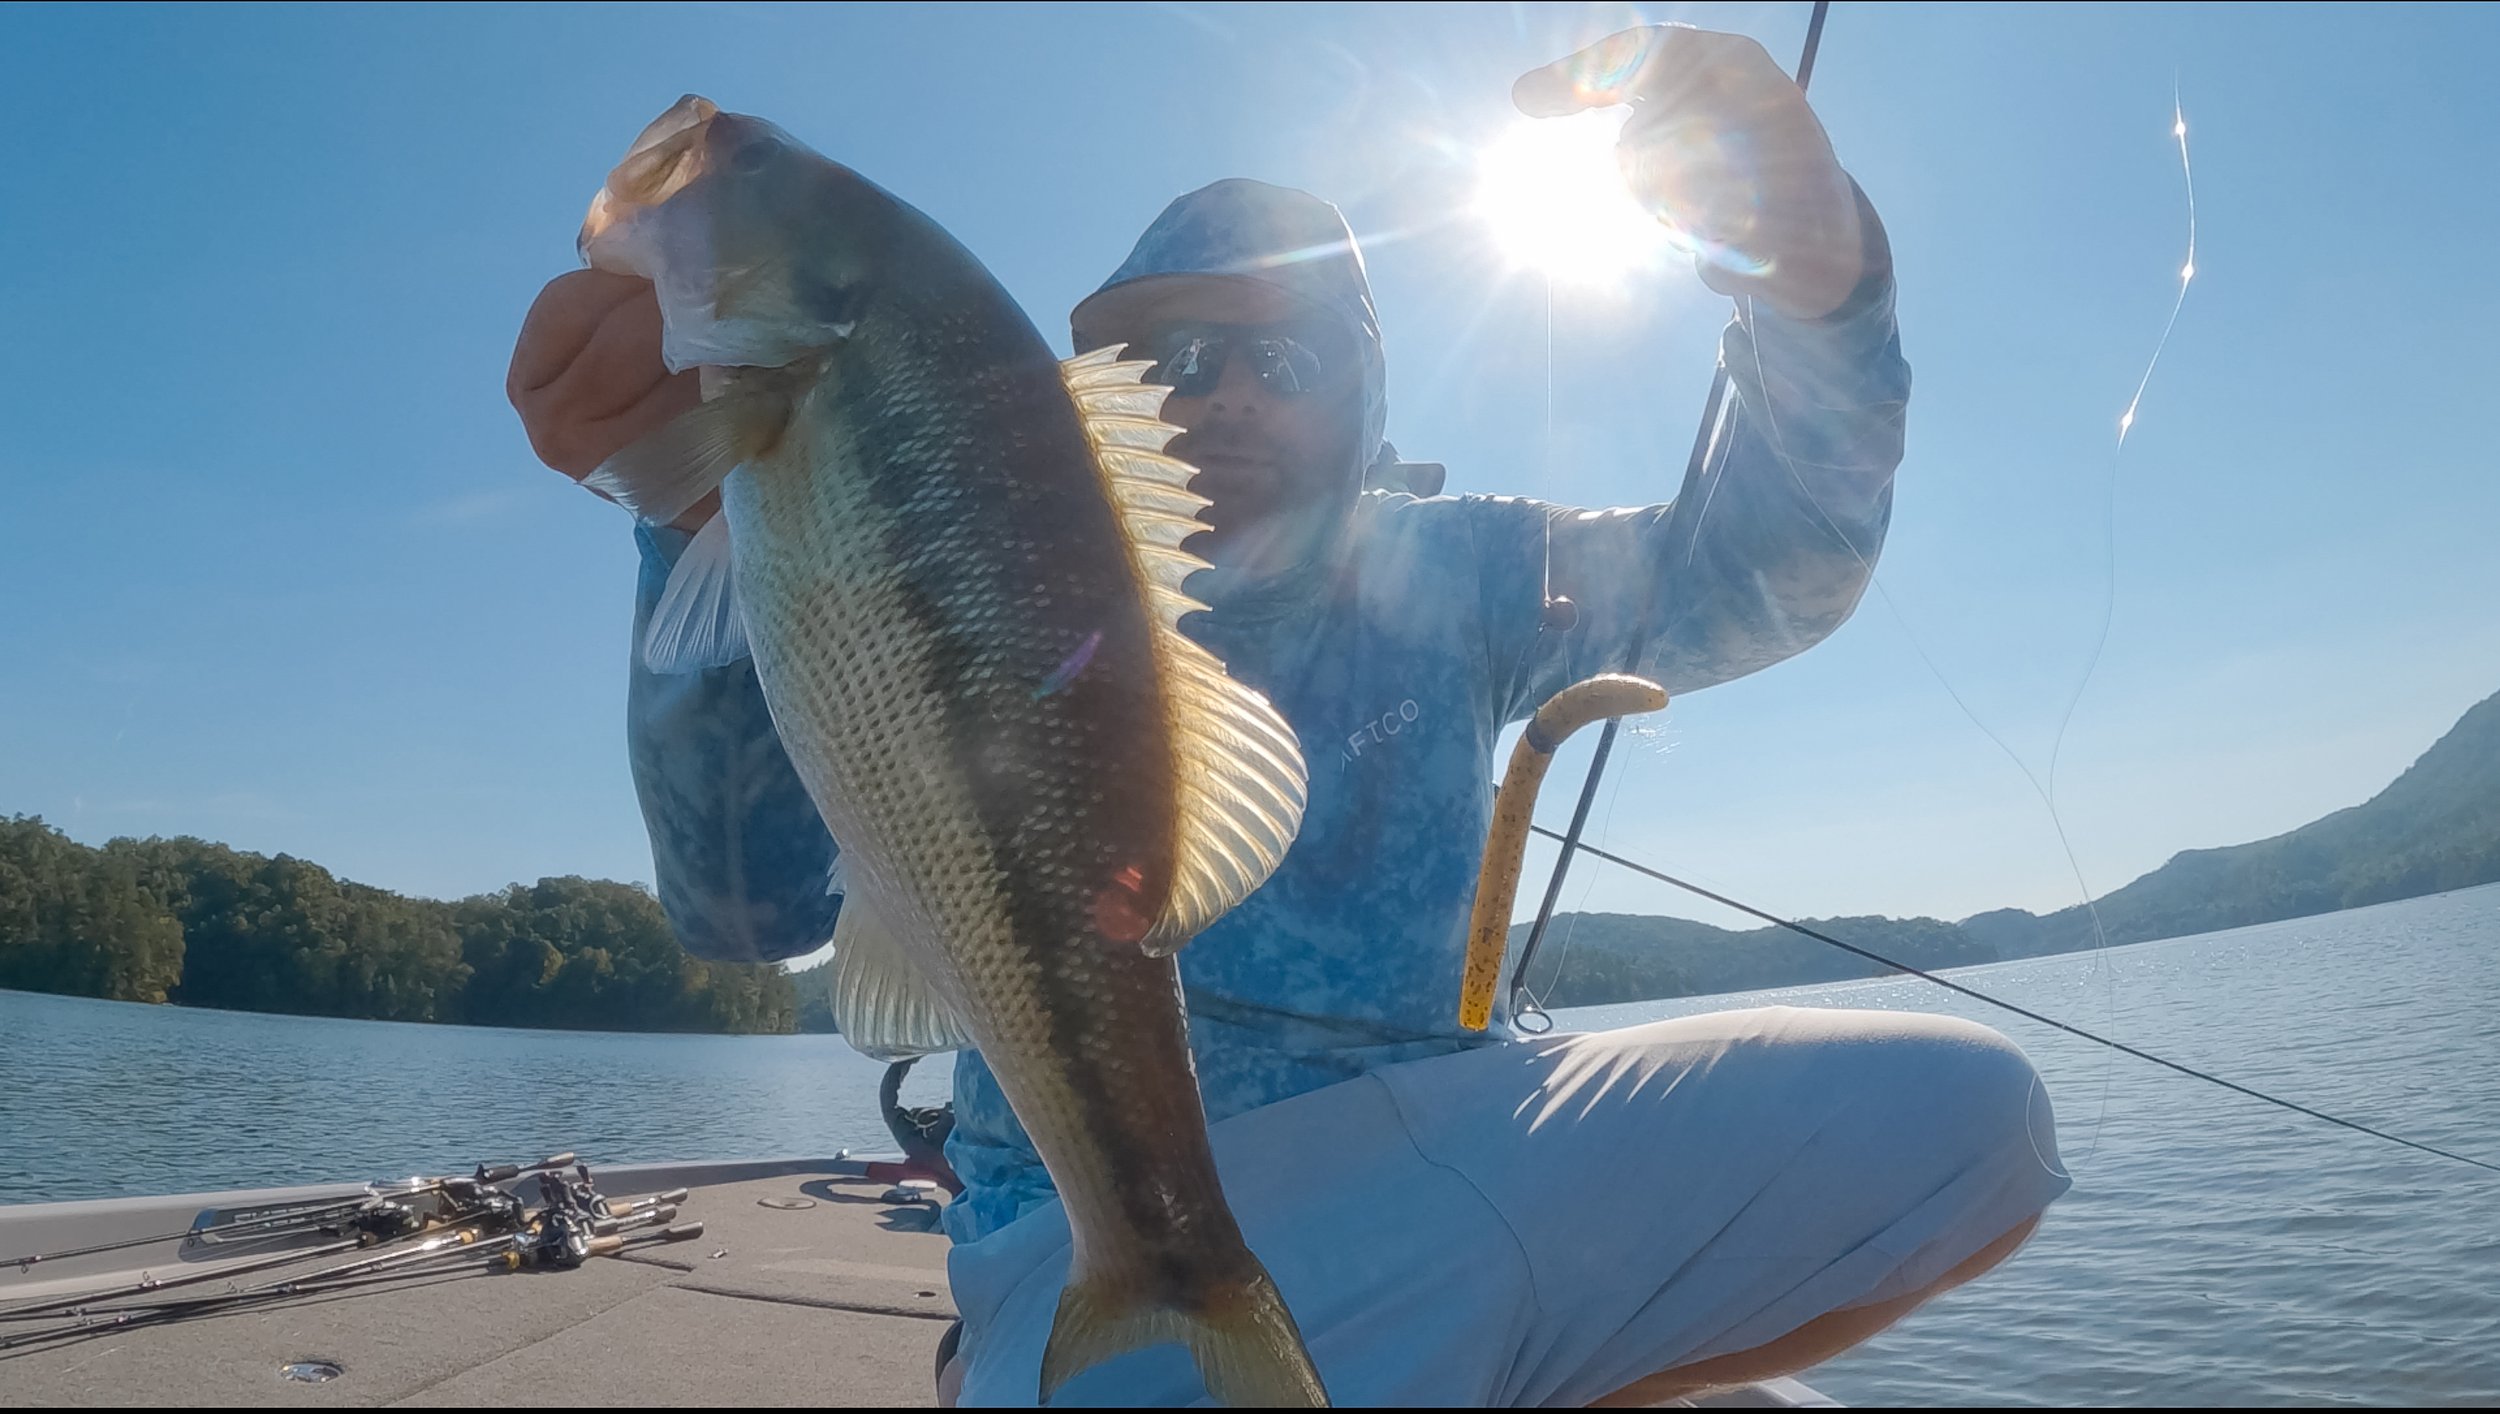 Why you should try fall bass fishing - Parks Blog